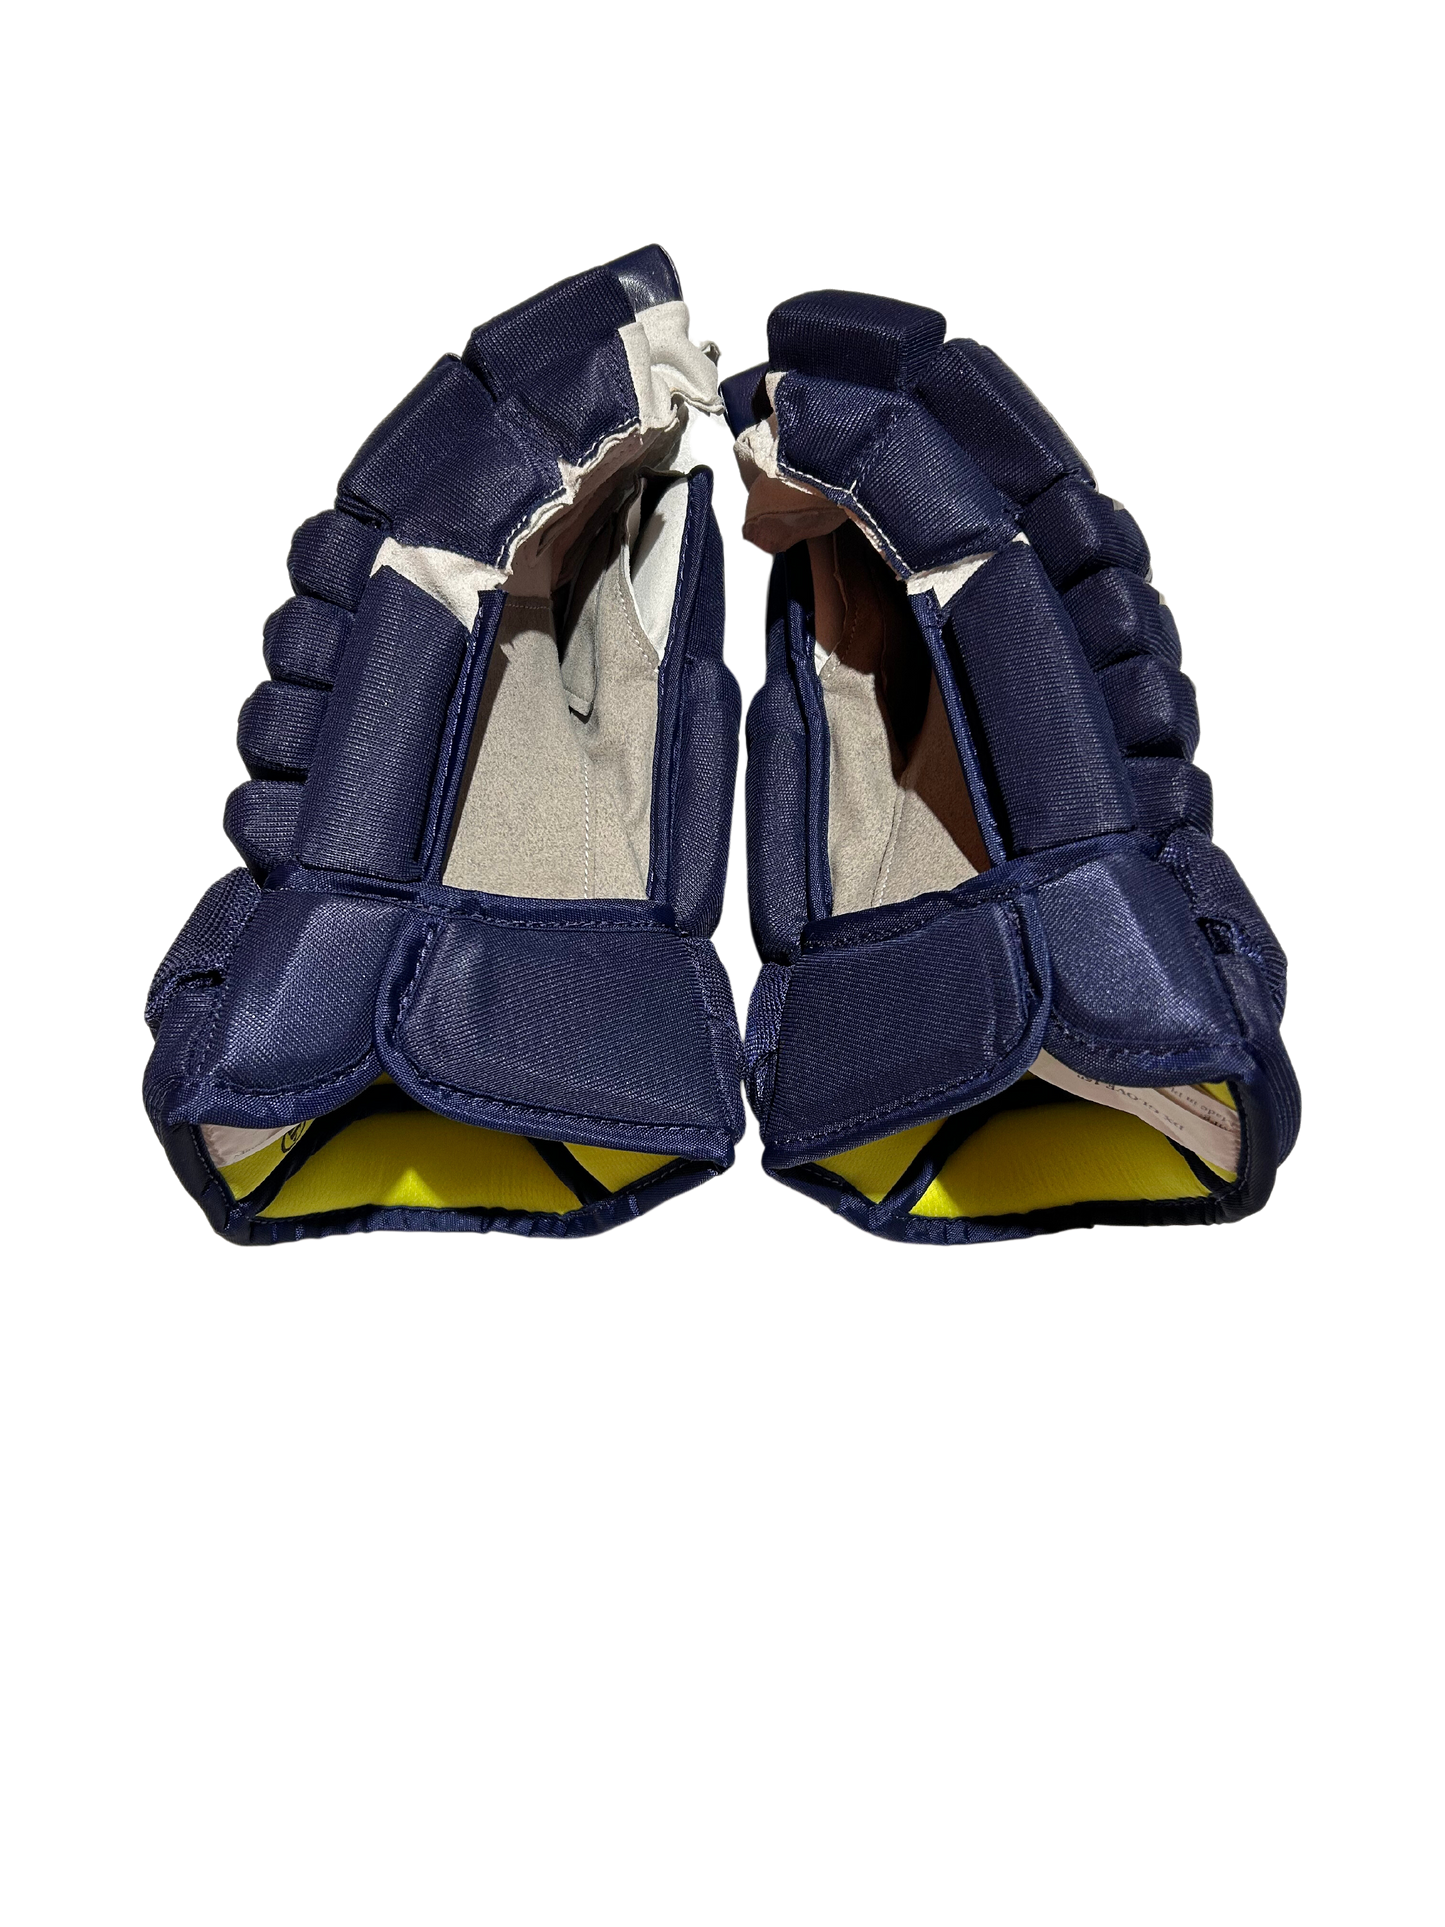 New Team Issued Navy Colorado Avalanche Warrior Alpha DX Pro Gloves (Multiple Sizes)